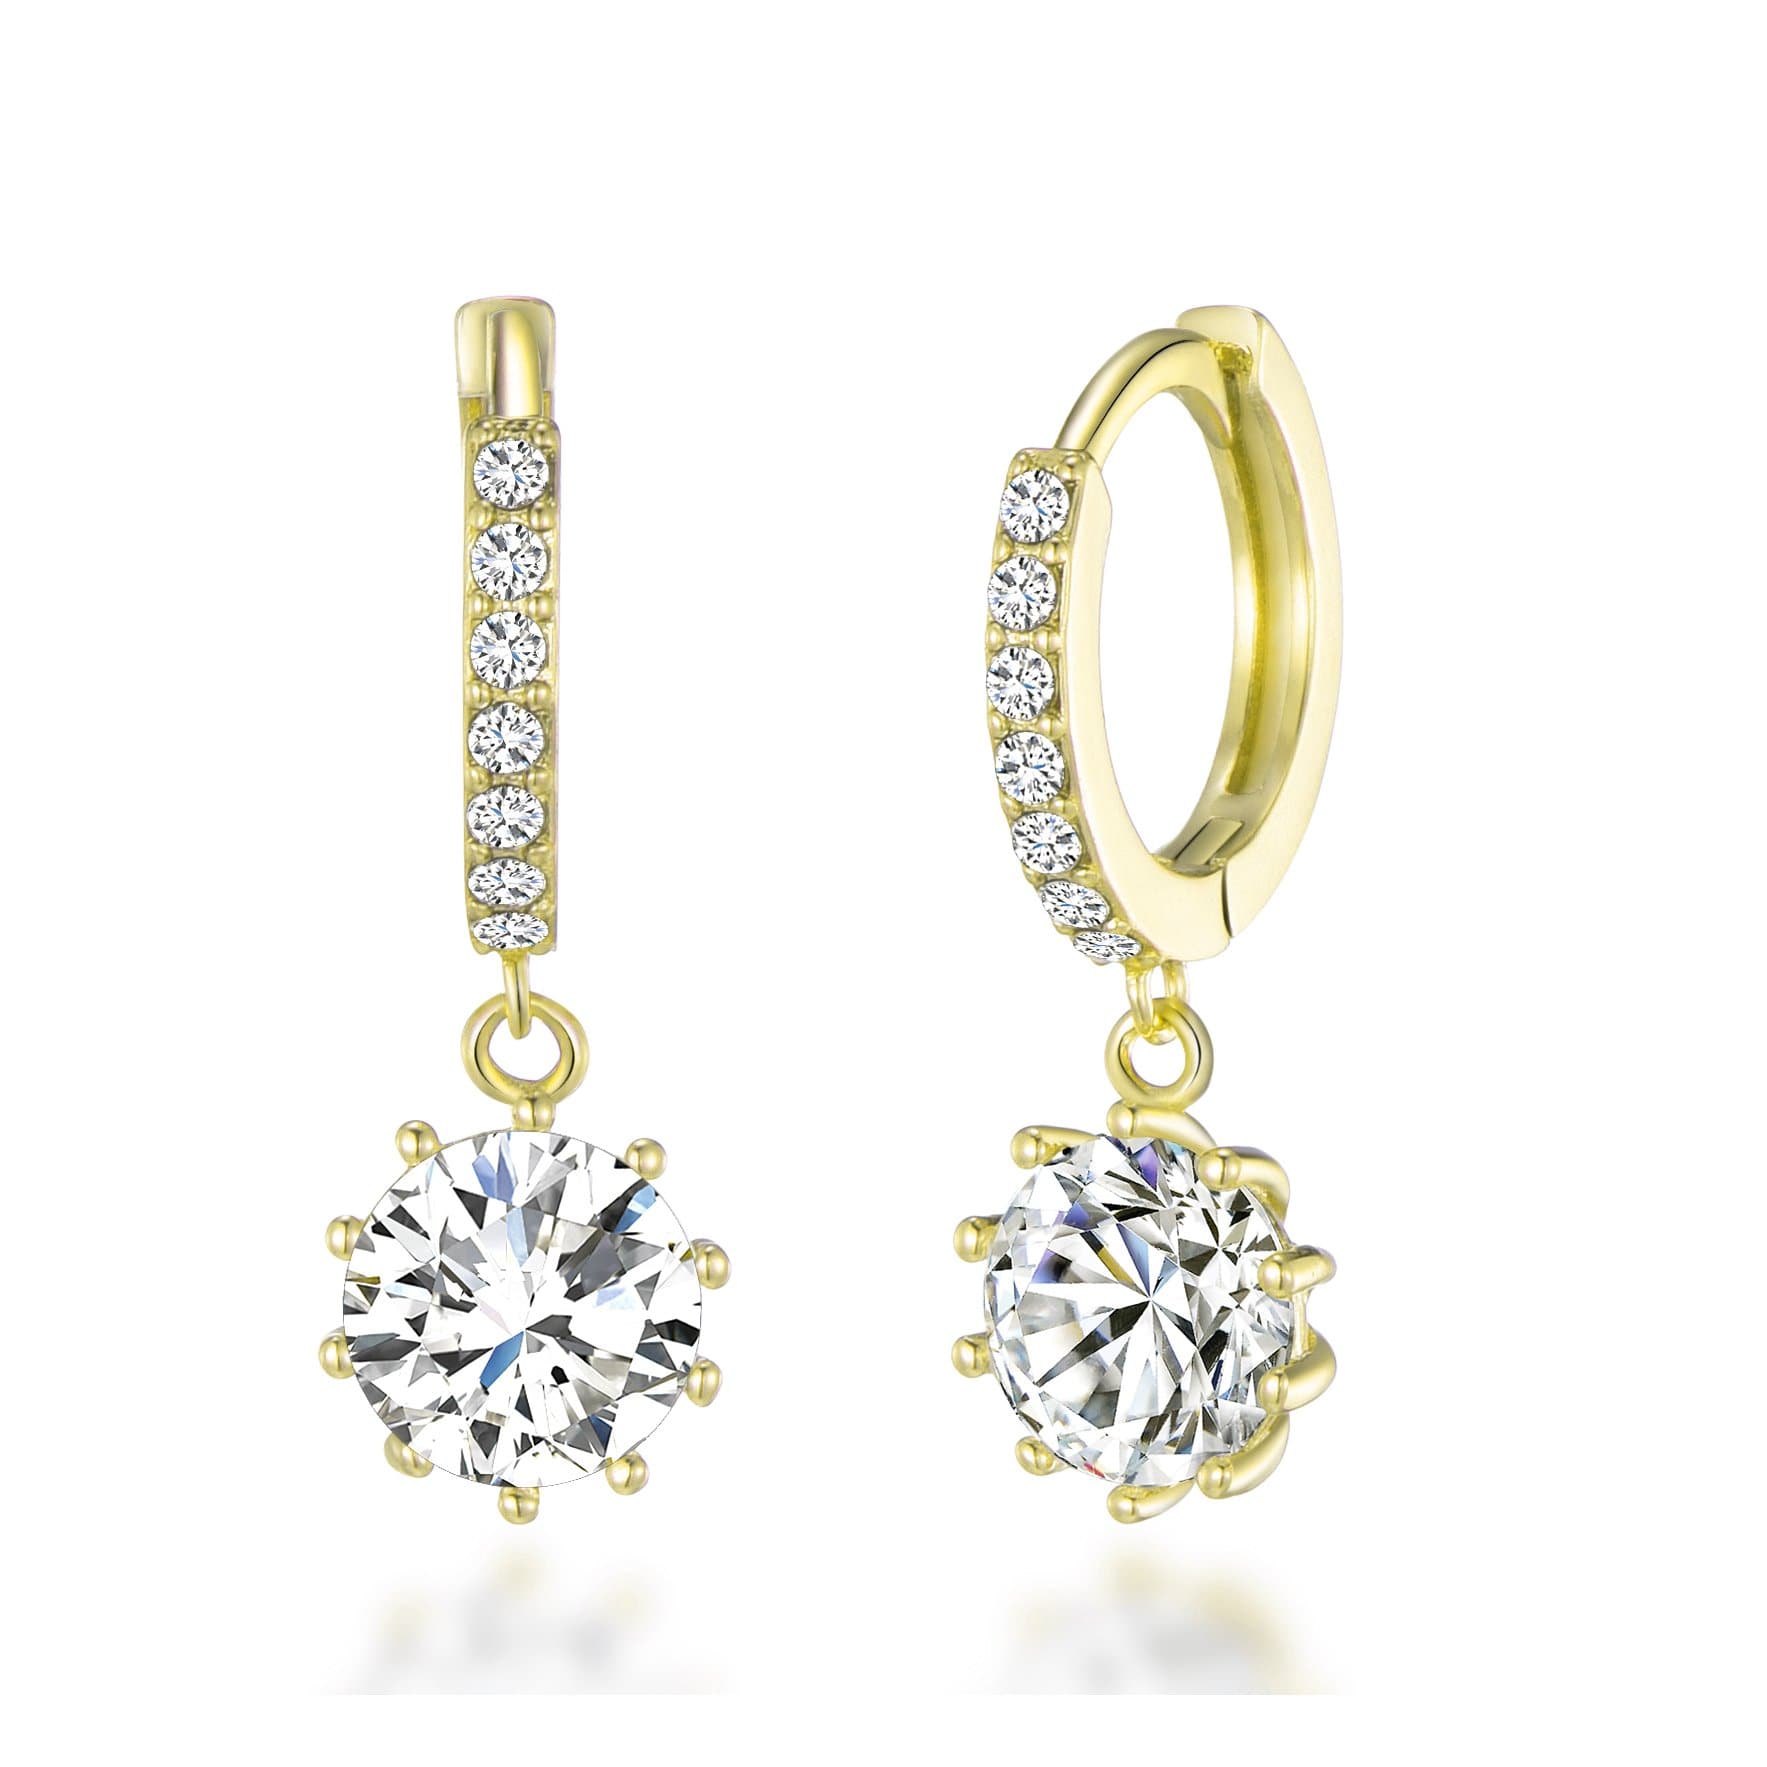 Gold Plated Solitaire Drop Hoop Earrings Created with Zircondia® Crystals by Philip Jones Jewellery